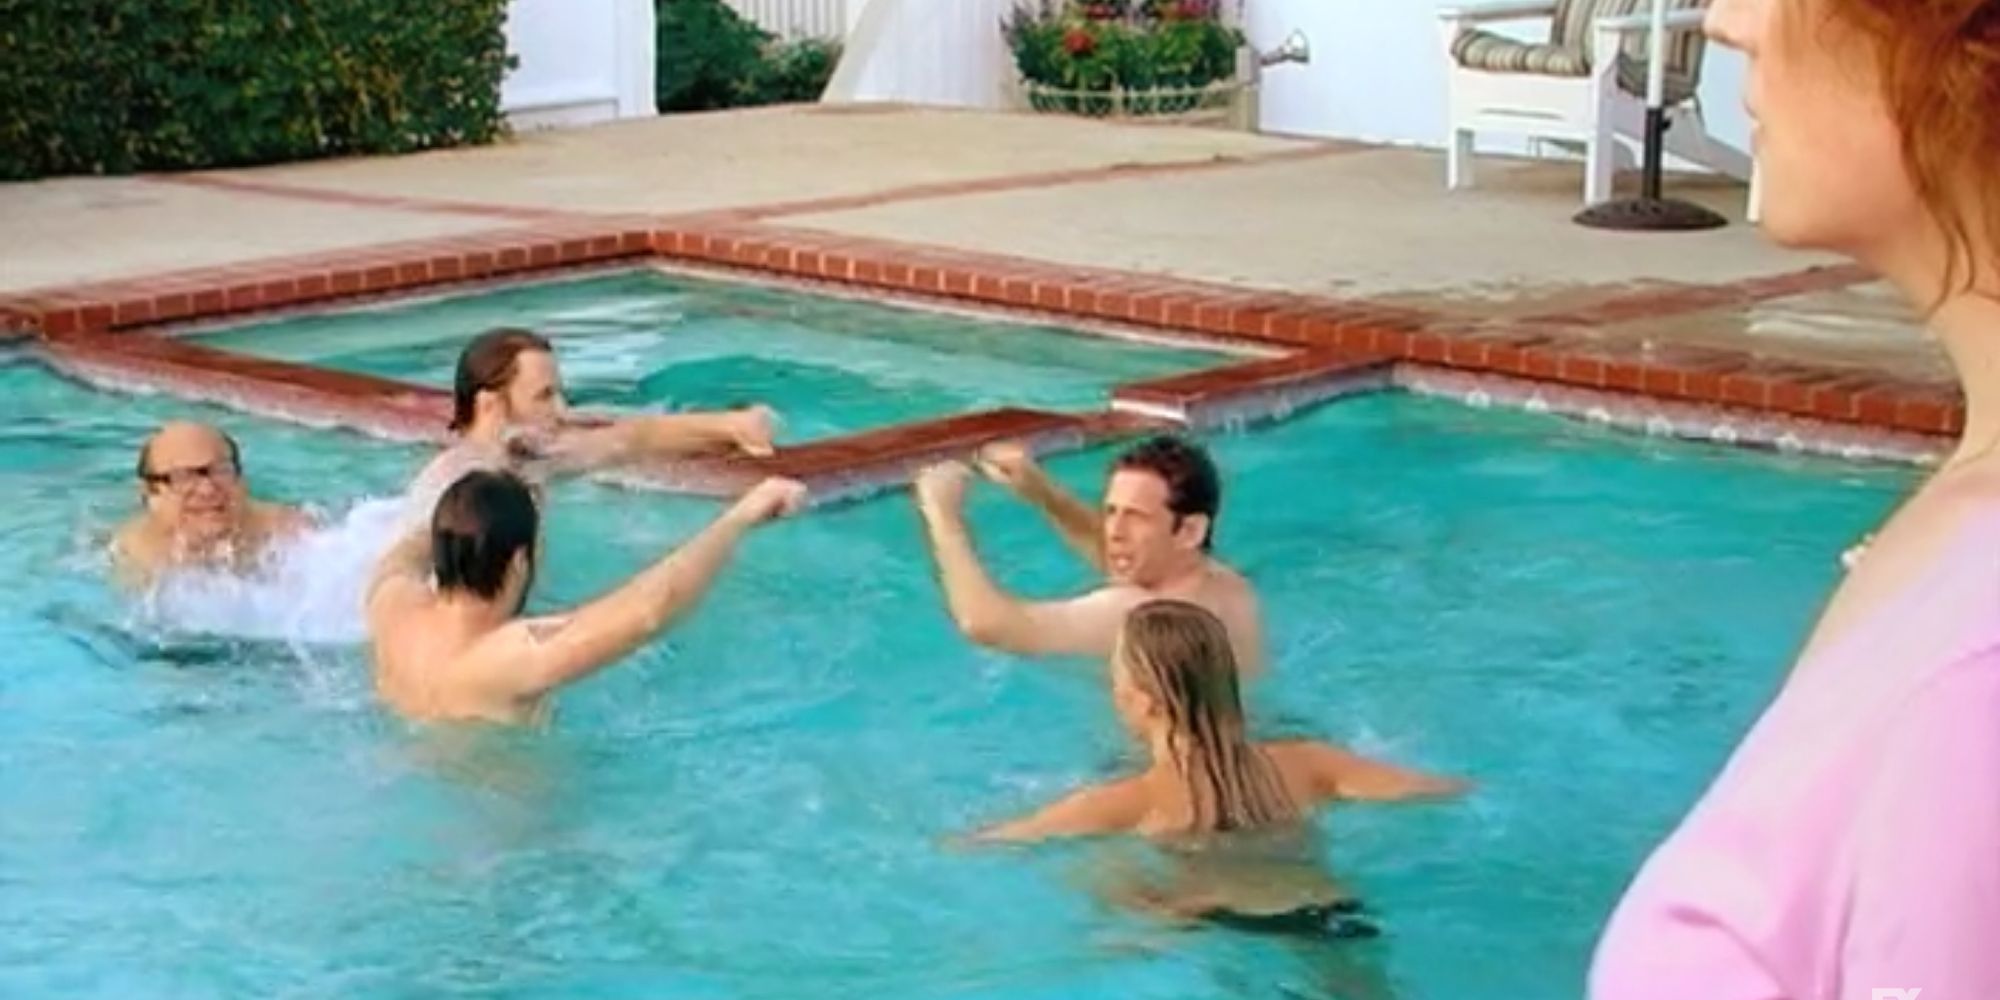 The gang enjoys a rich couple's swimming pool in It's Always Sunny in Philadelphia.